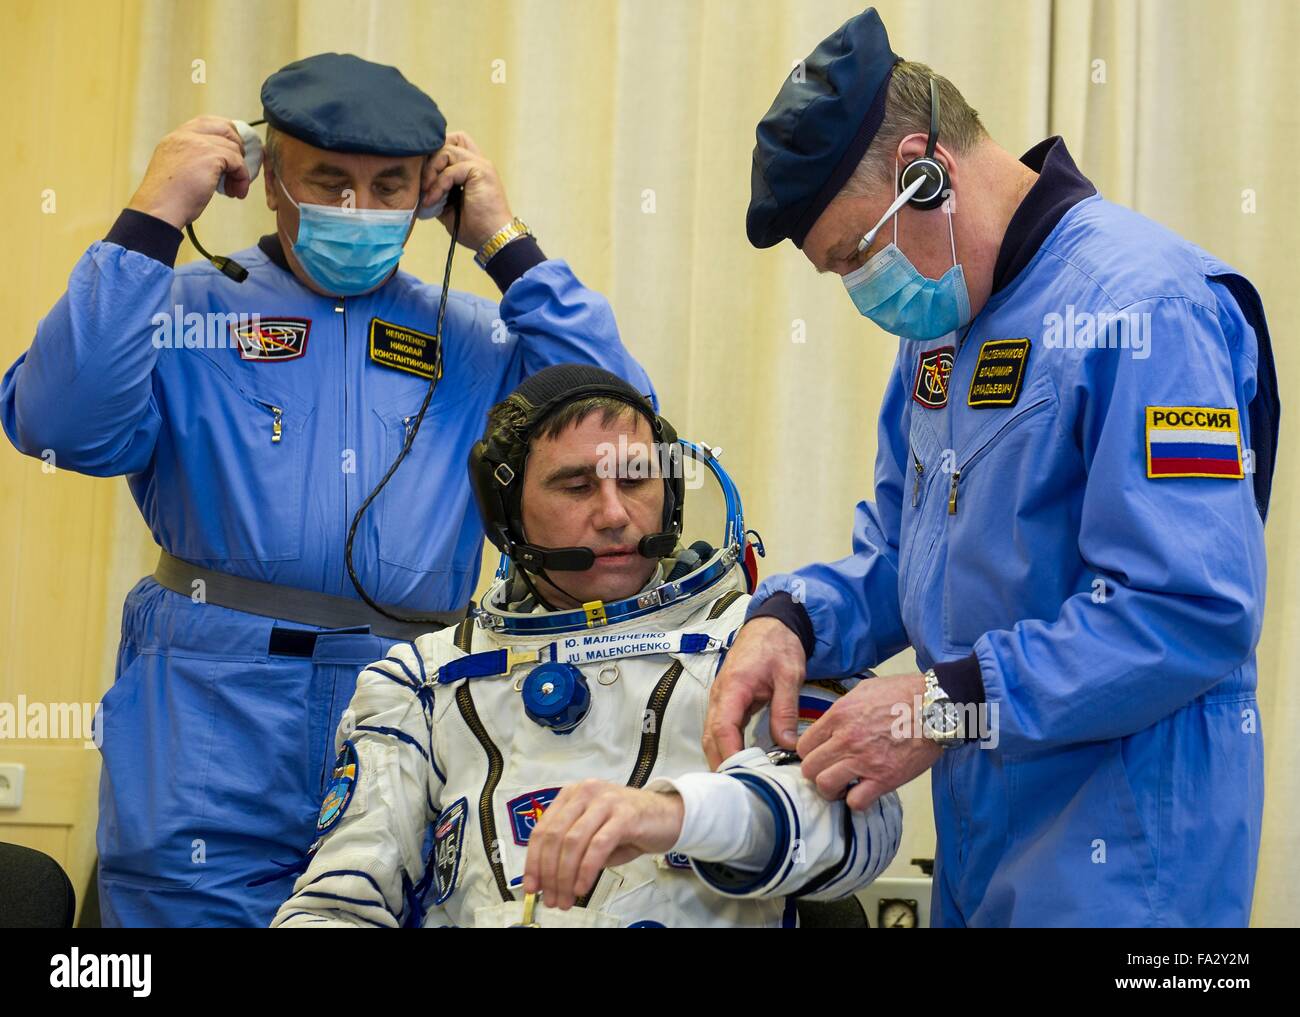 International Space Station Expedition 46 crew member Soyuz Commander Russian Yuri Malenchenko has his Sokol space suits adjusted in Building 254 before launch onboard the Soyuz TMA-19M spacecraft December 15, 2015 in Baikonur, Kazakhstan. Stock Photo